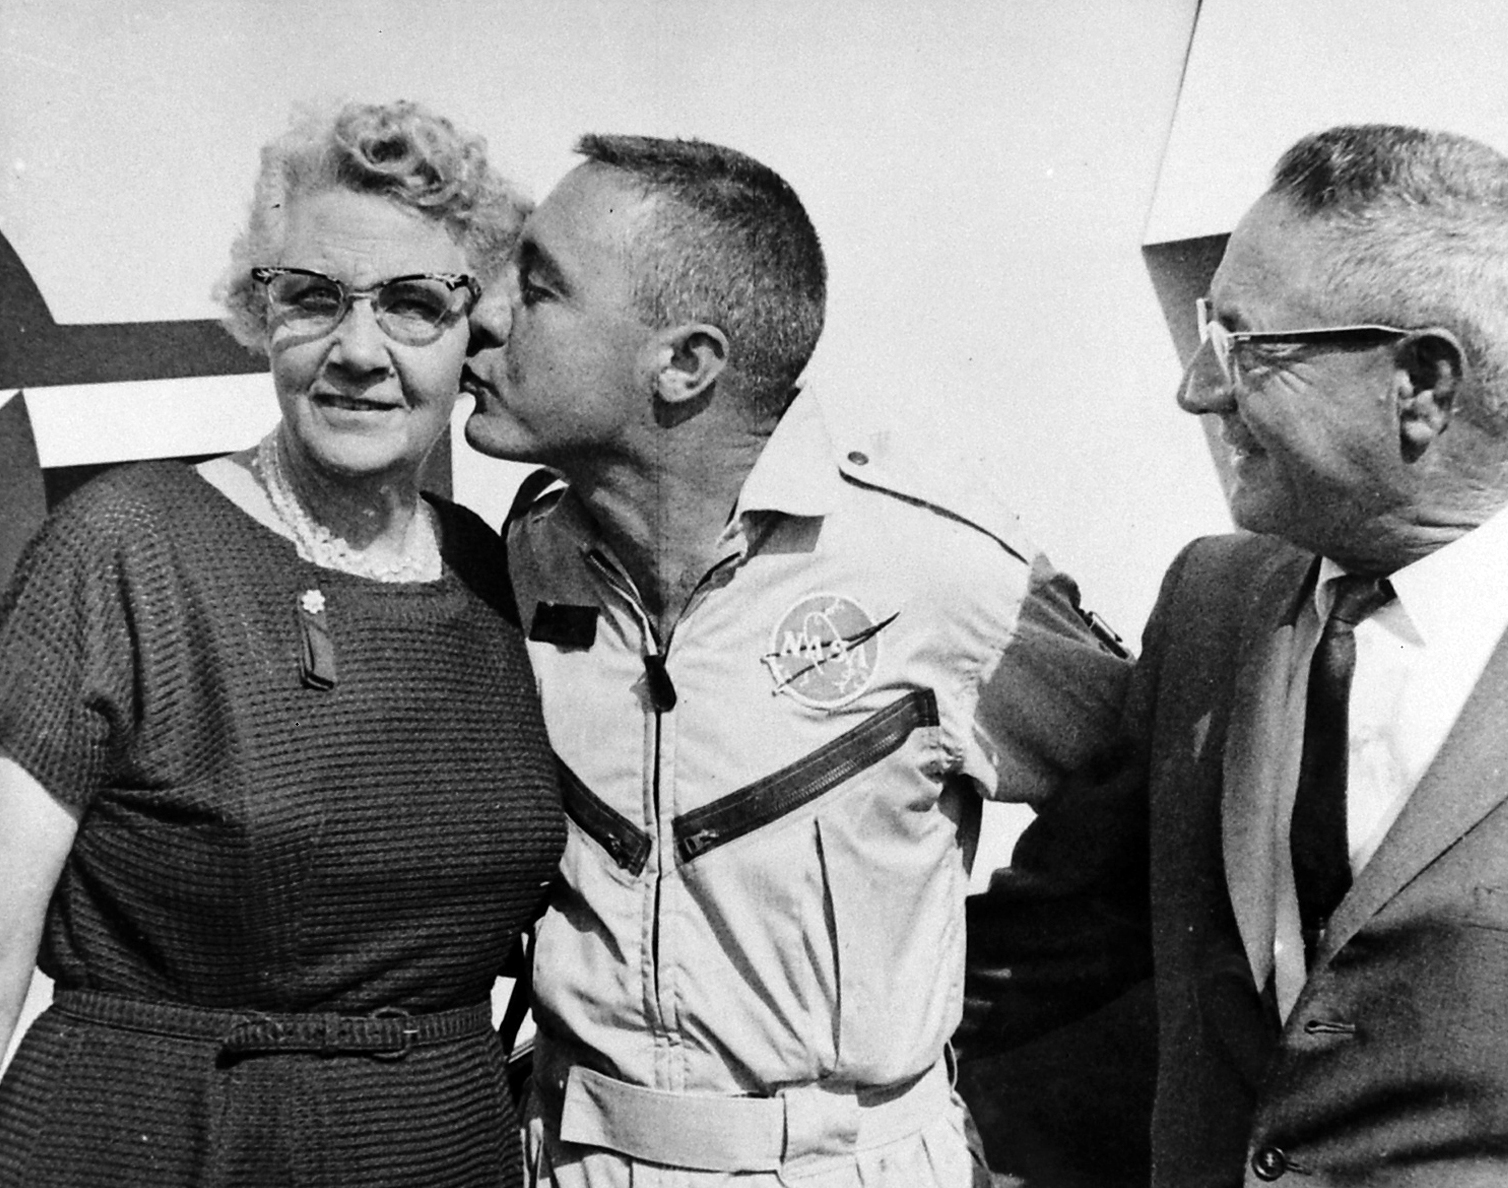 Astronaut Gus "Virgil" Grissom kissing his mother after his successful Gemini 3 mission, 1965.